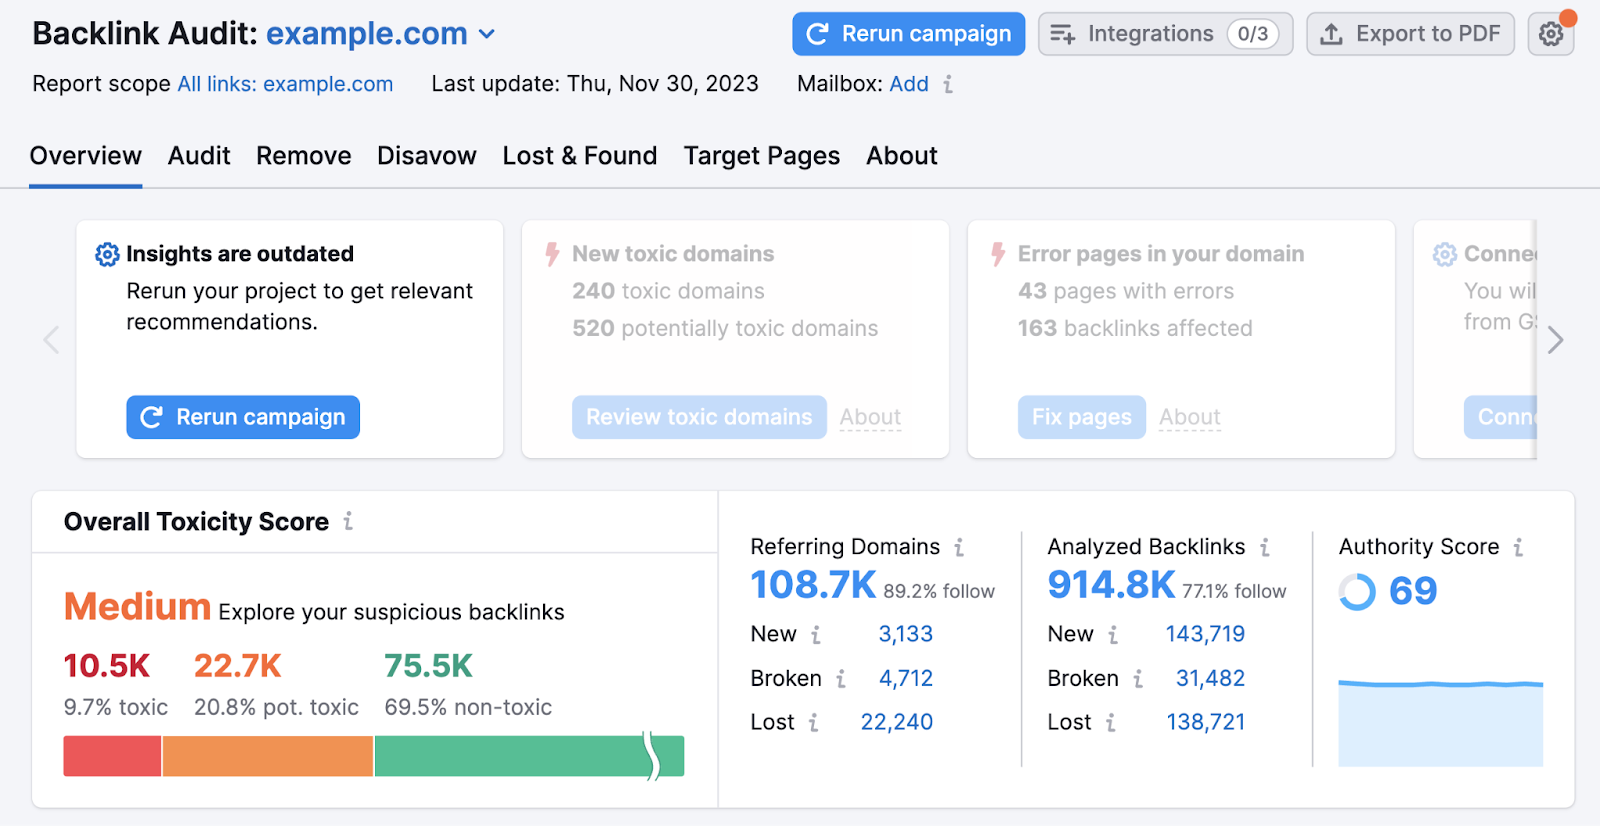 Backlink Audit tool showing overall toxicity score, referring domains, analyzed backlinks, authority score, and other data